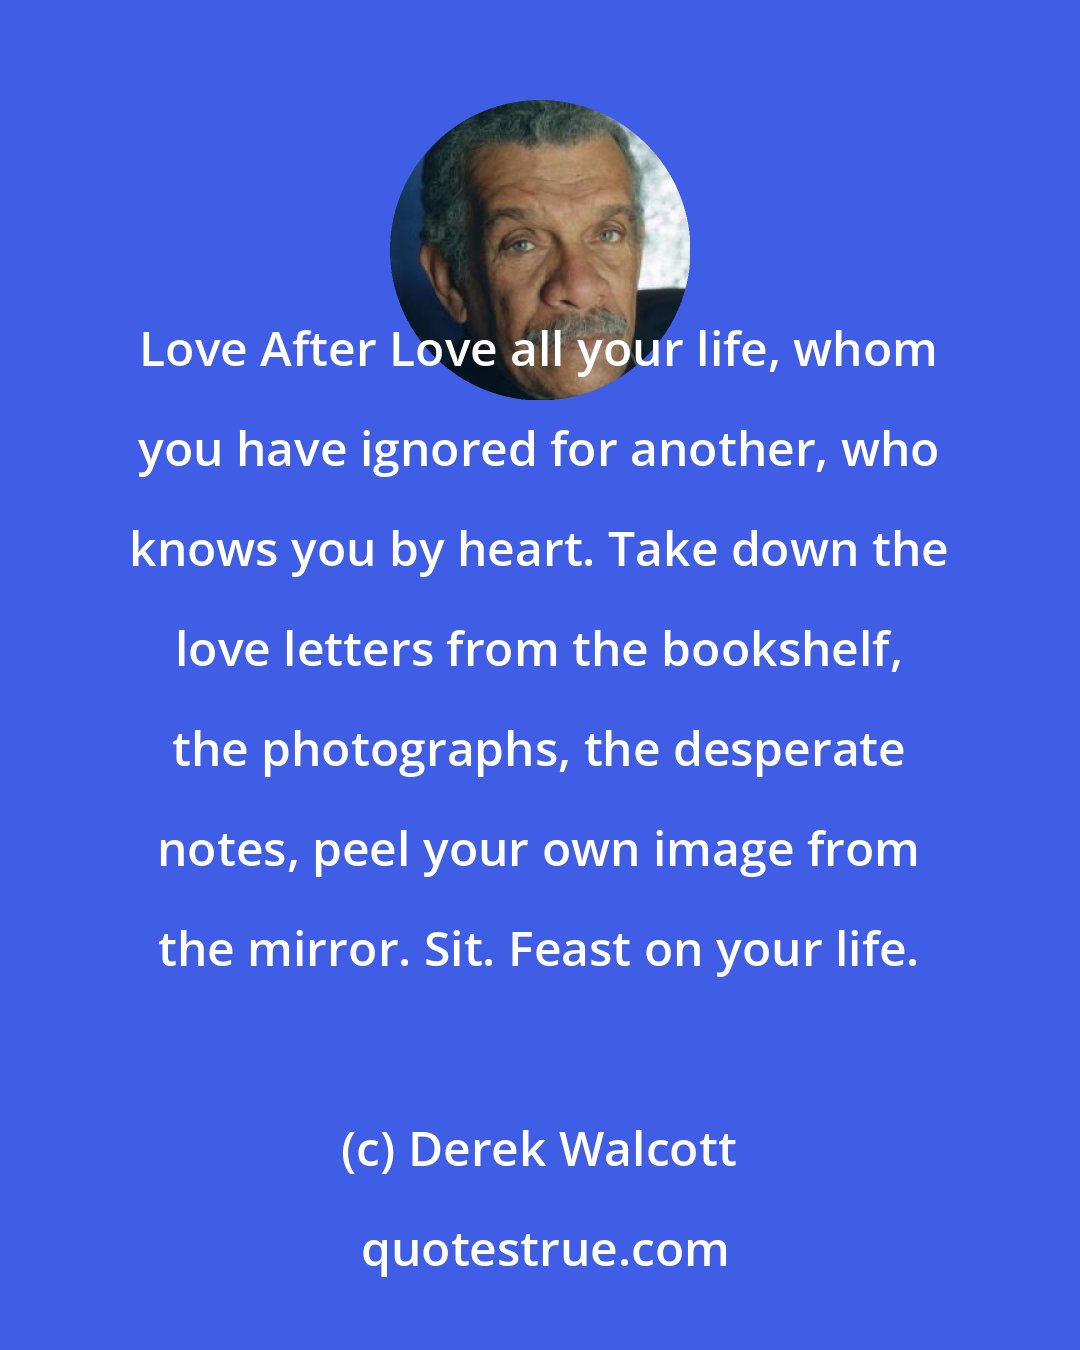 Derek Walcott: Love After Love all your life, whom you have ignored for another, who knows you by heart. Take down the love letters from the bookshelf, the photographs, the desperate notes, peel your own image from the mirror. Sit. Feast on your life.